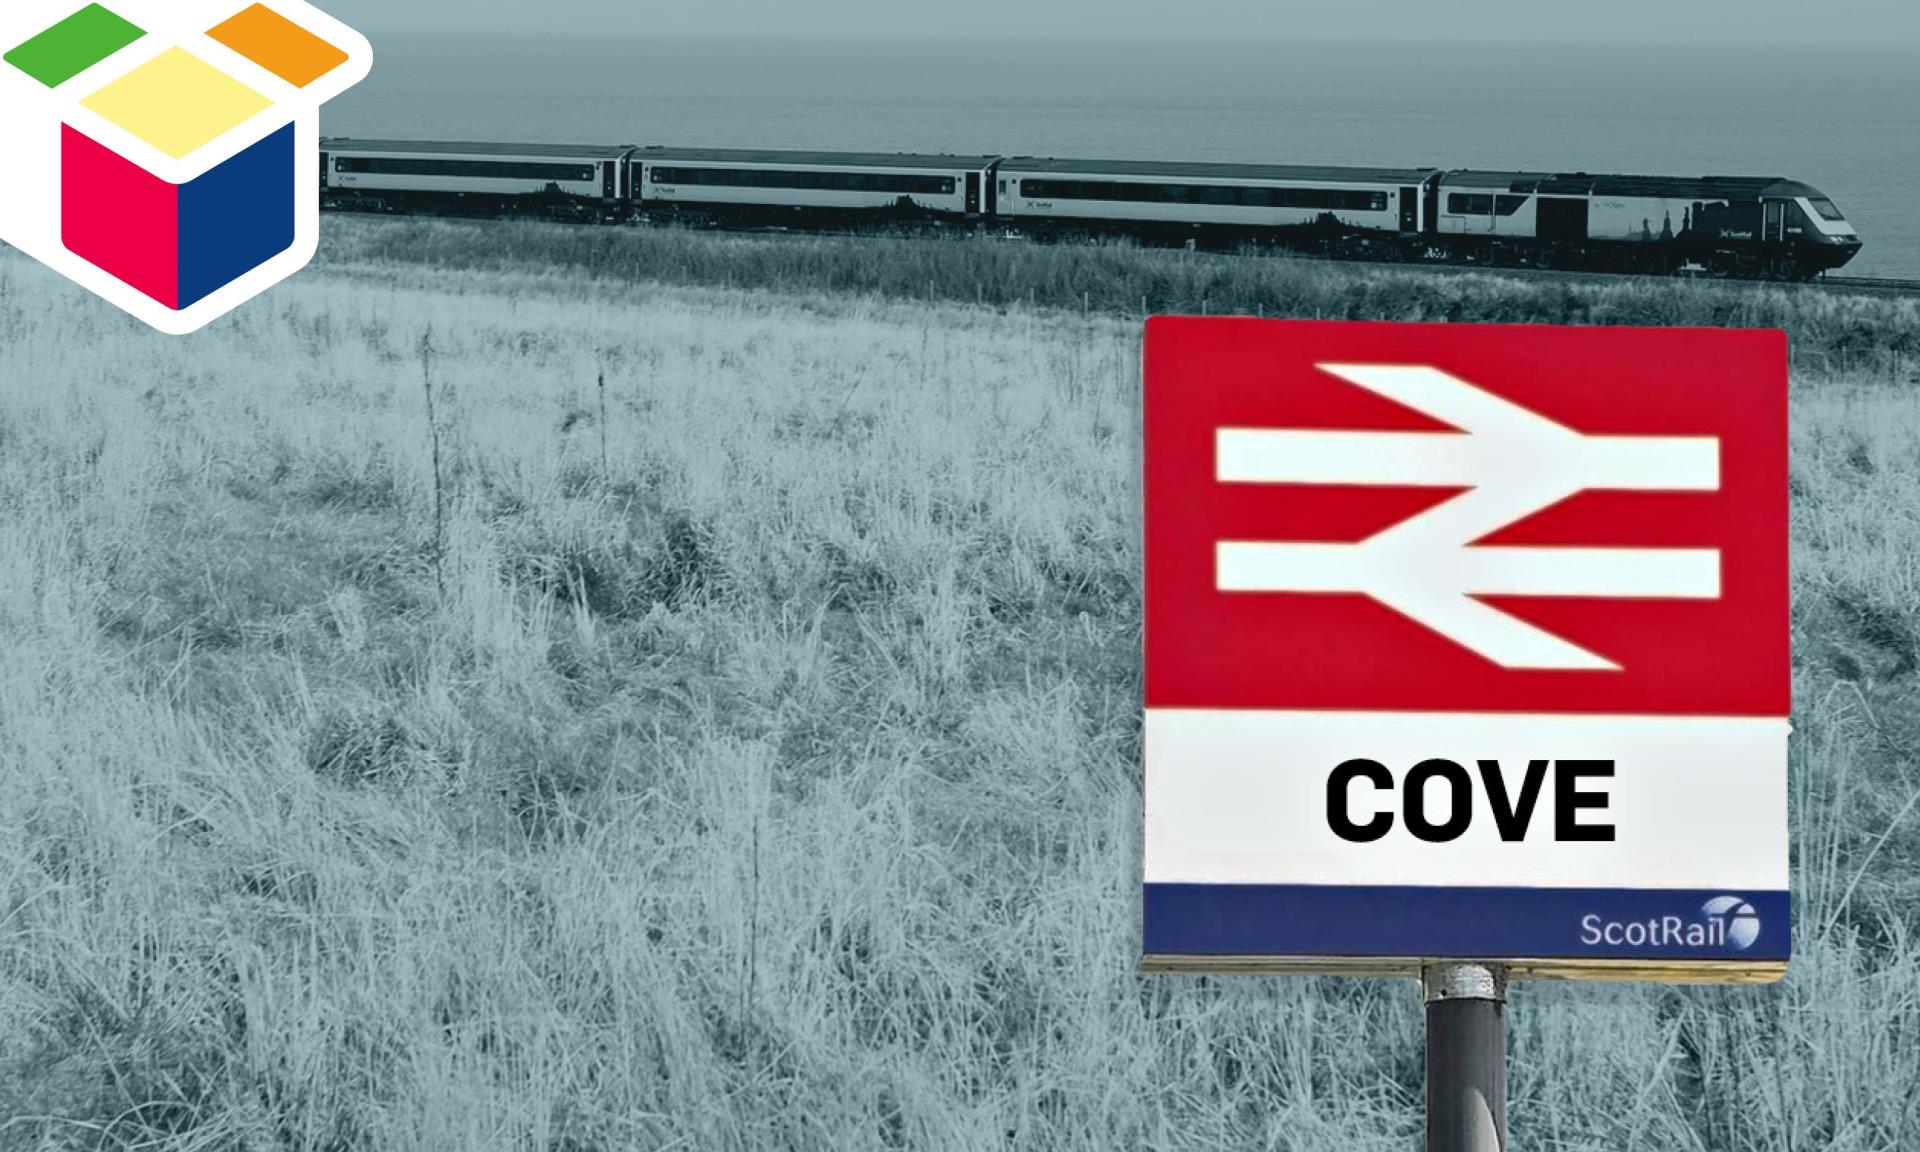 A new railway station could be coming to Cove in the future.